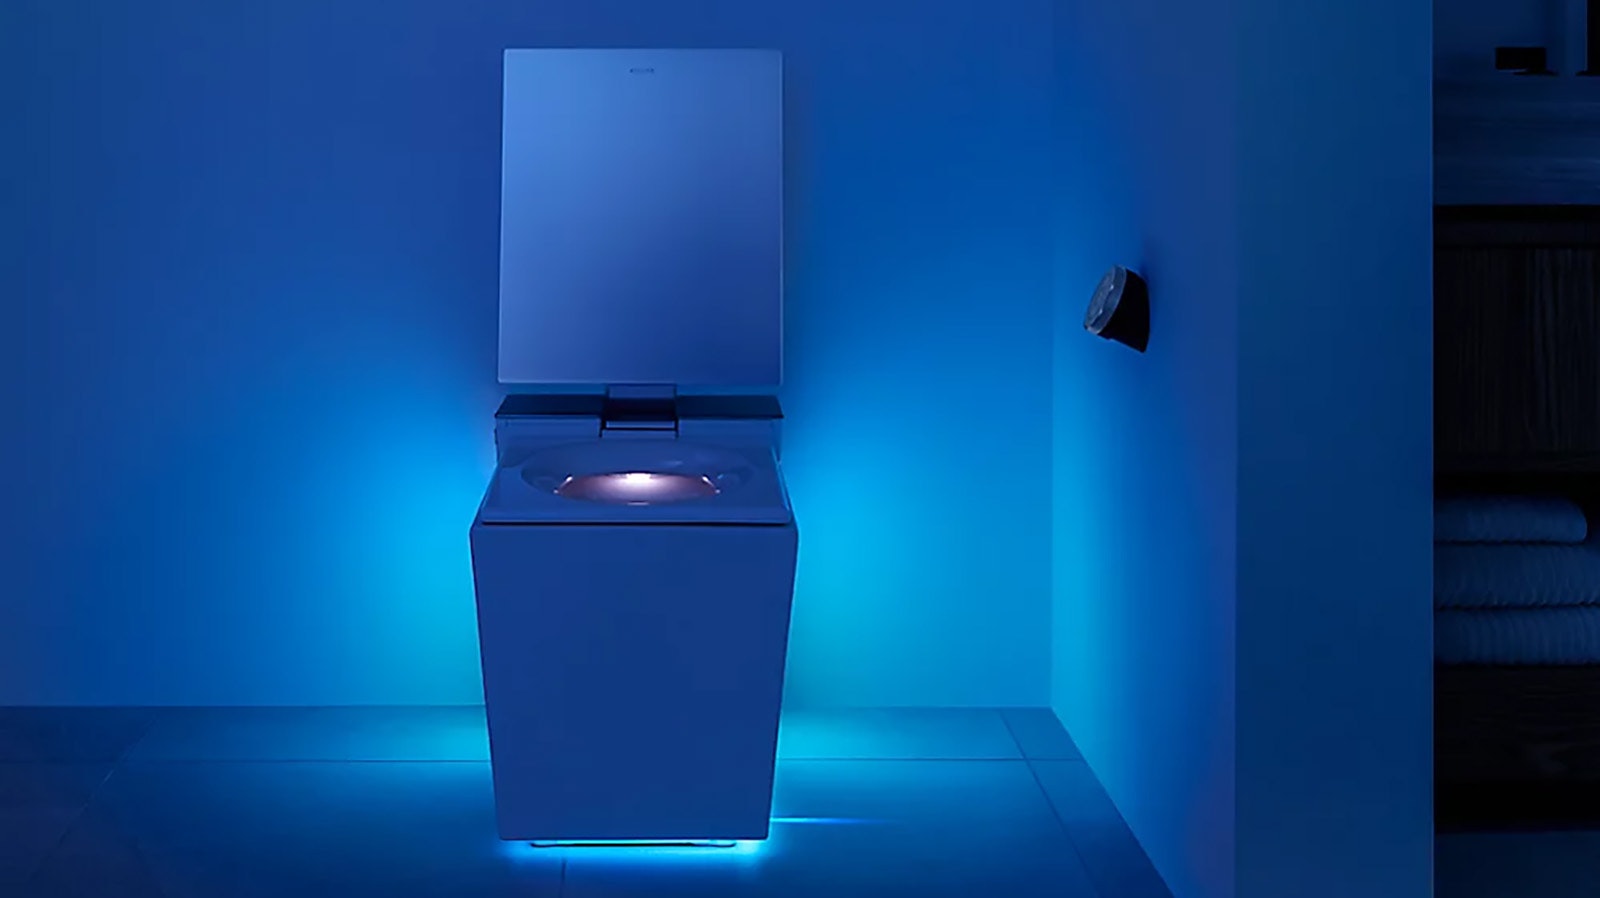 With today's smart toilets, you don't have to worry about knocking your shins in the dark in the middle of the night.